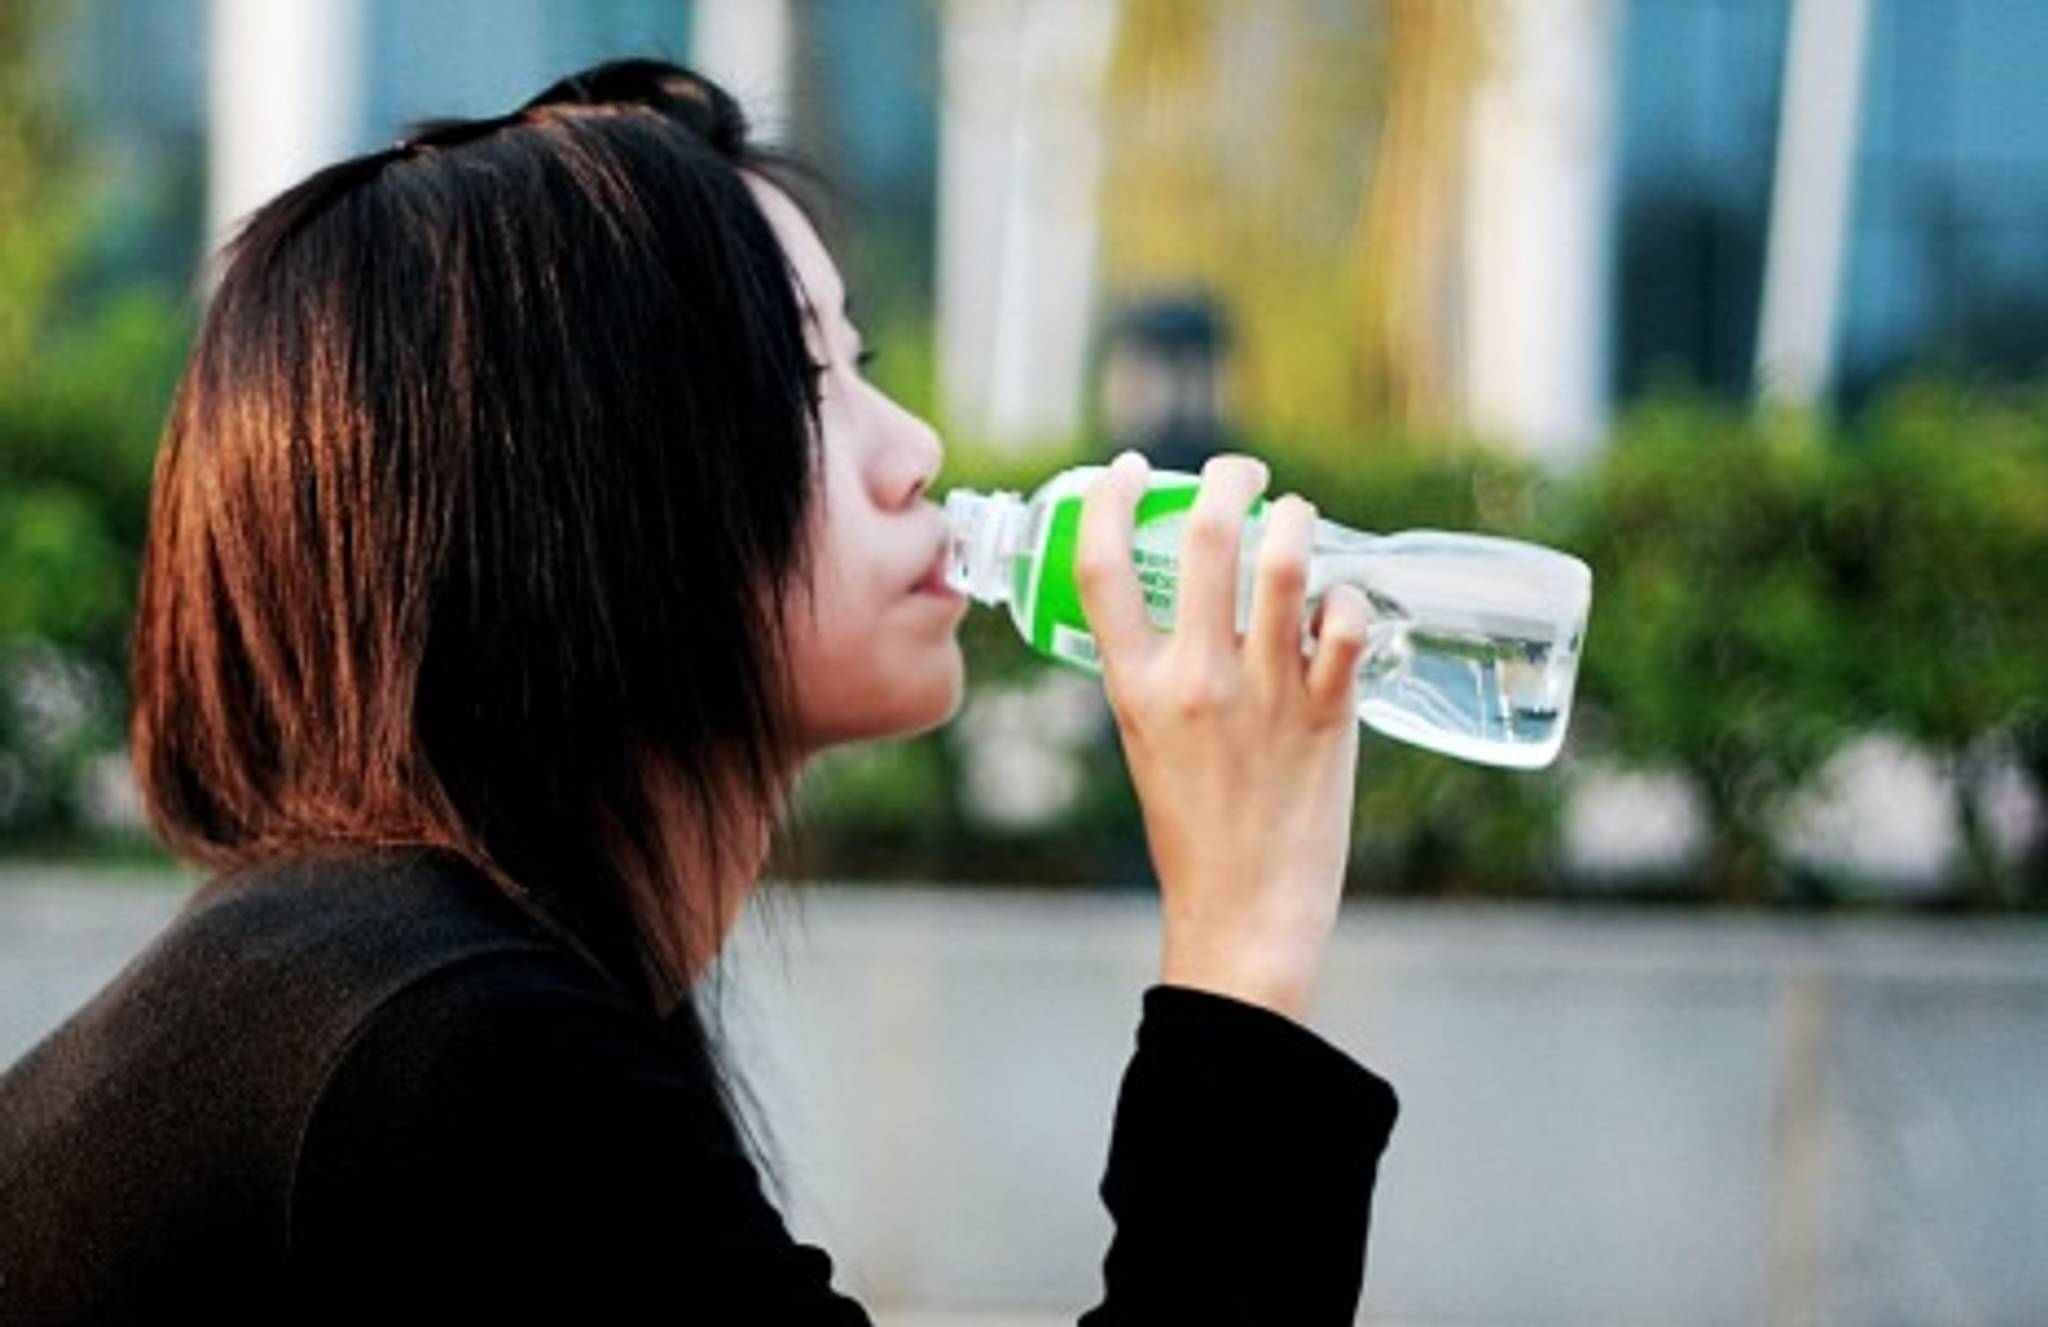 Why are Brits drinking so much water?